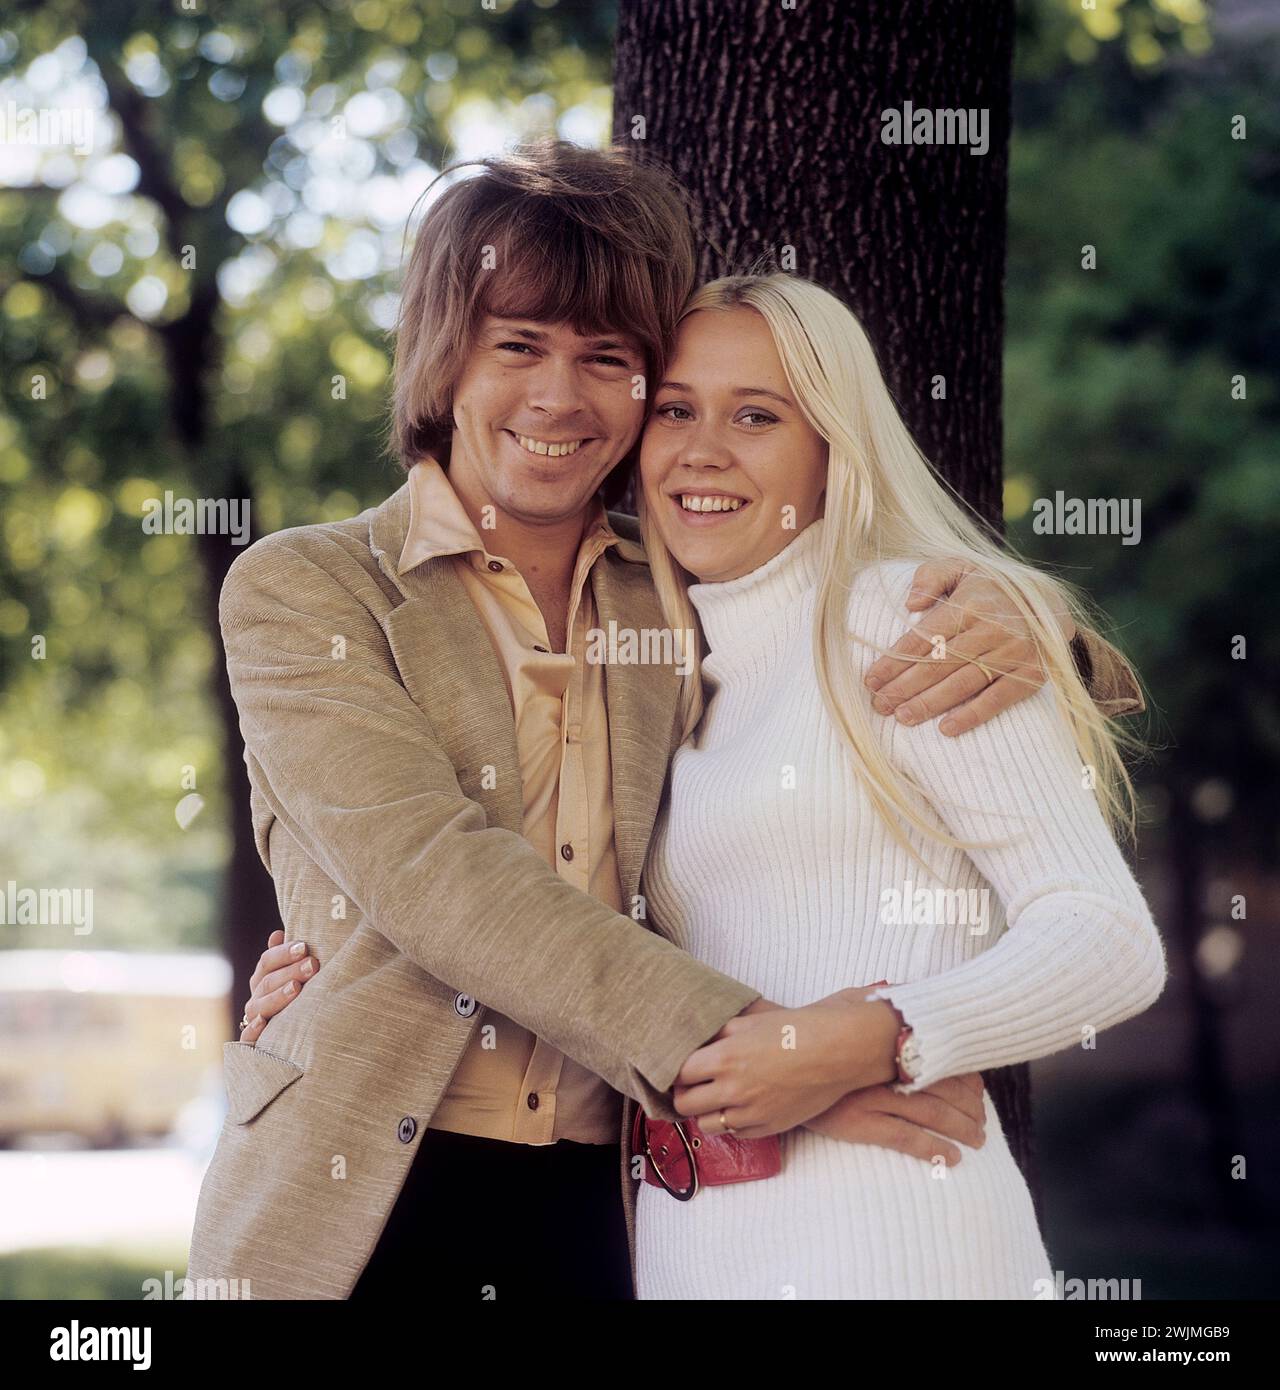 Agnetha Fältskog (b. 1950)Swedish pop singer, one of the four members of ABBA Here at home with Björn Ulvaeus (b. 1945) Swedish musician and songwriter July 6, 1971 Photo: Åke Cyrus / Sjöberg Archive / TT code 2900 Stock Photo